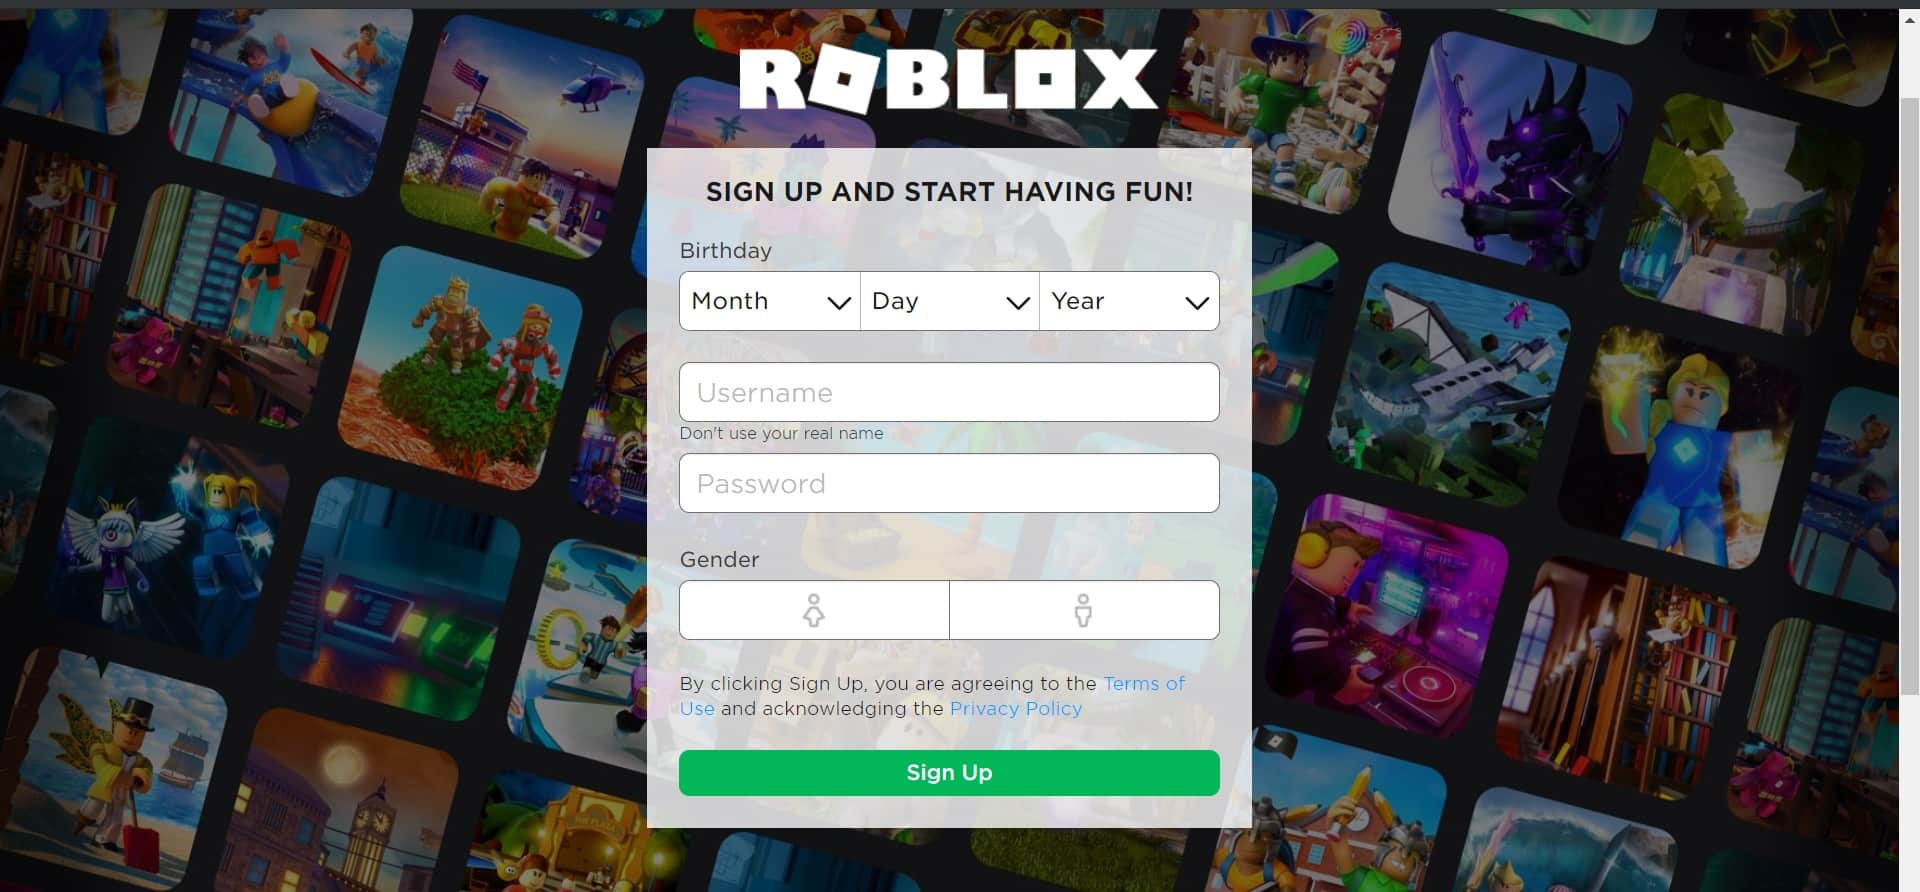 How To Record On Roblox 2020 April